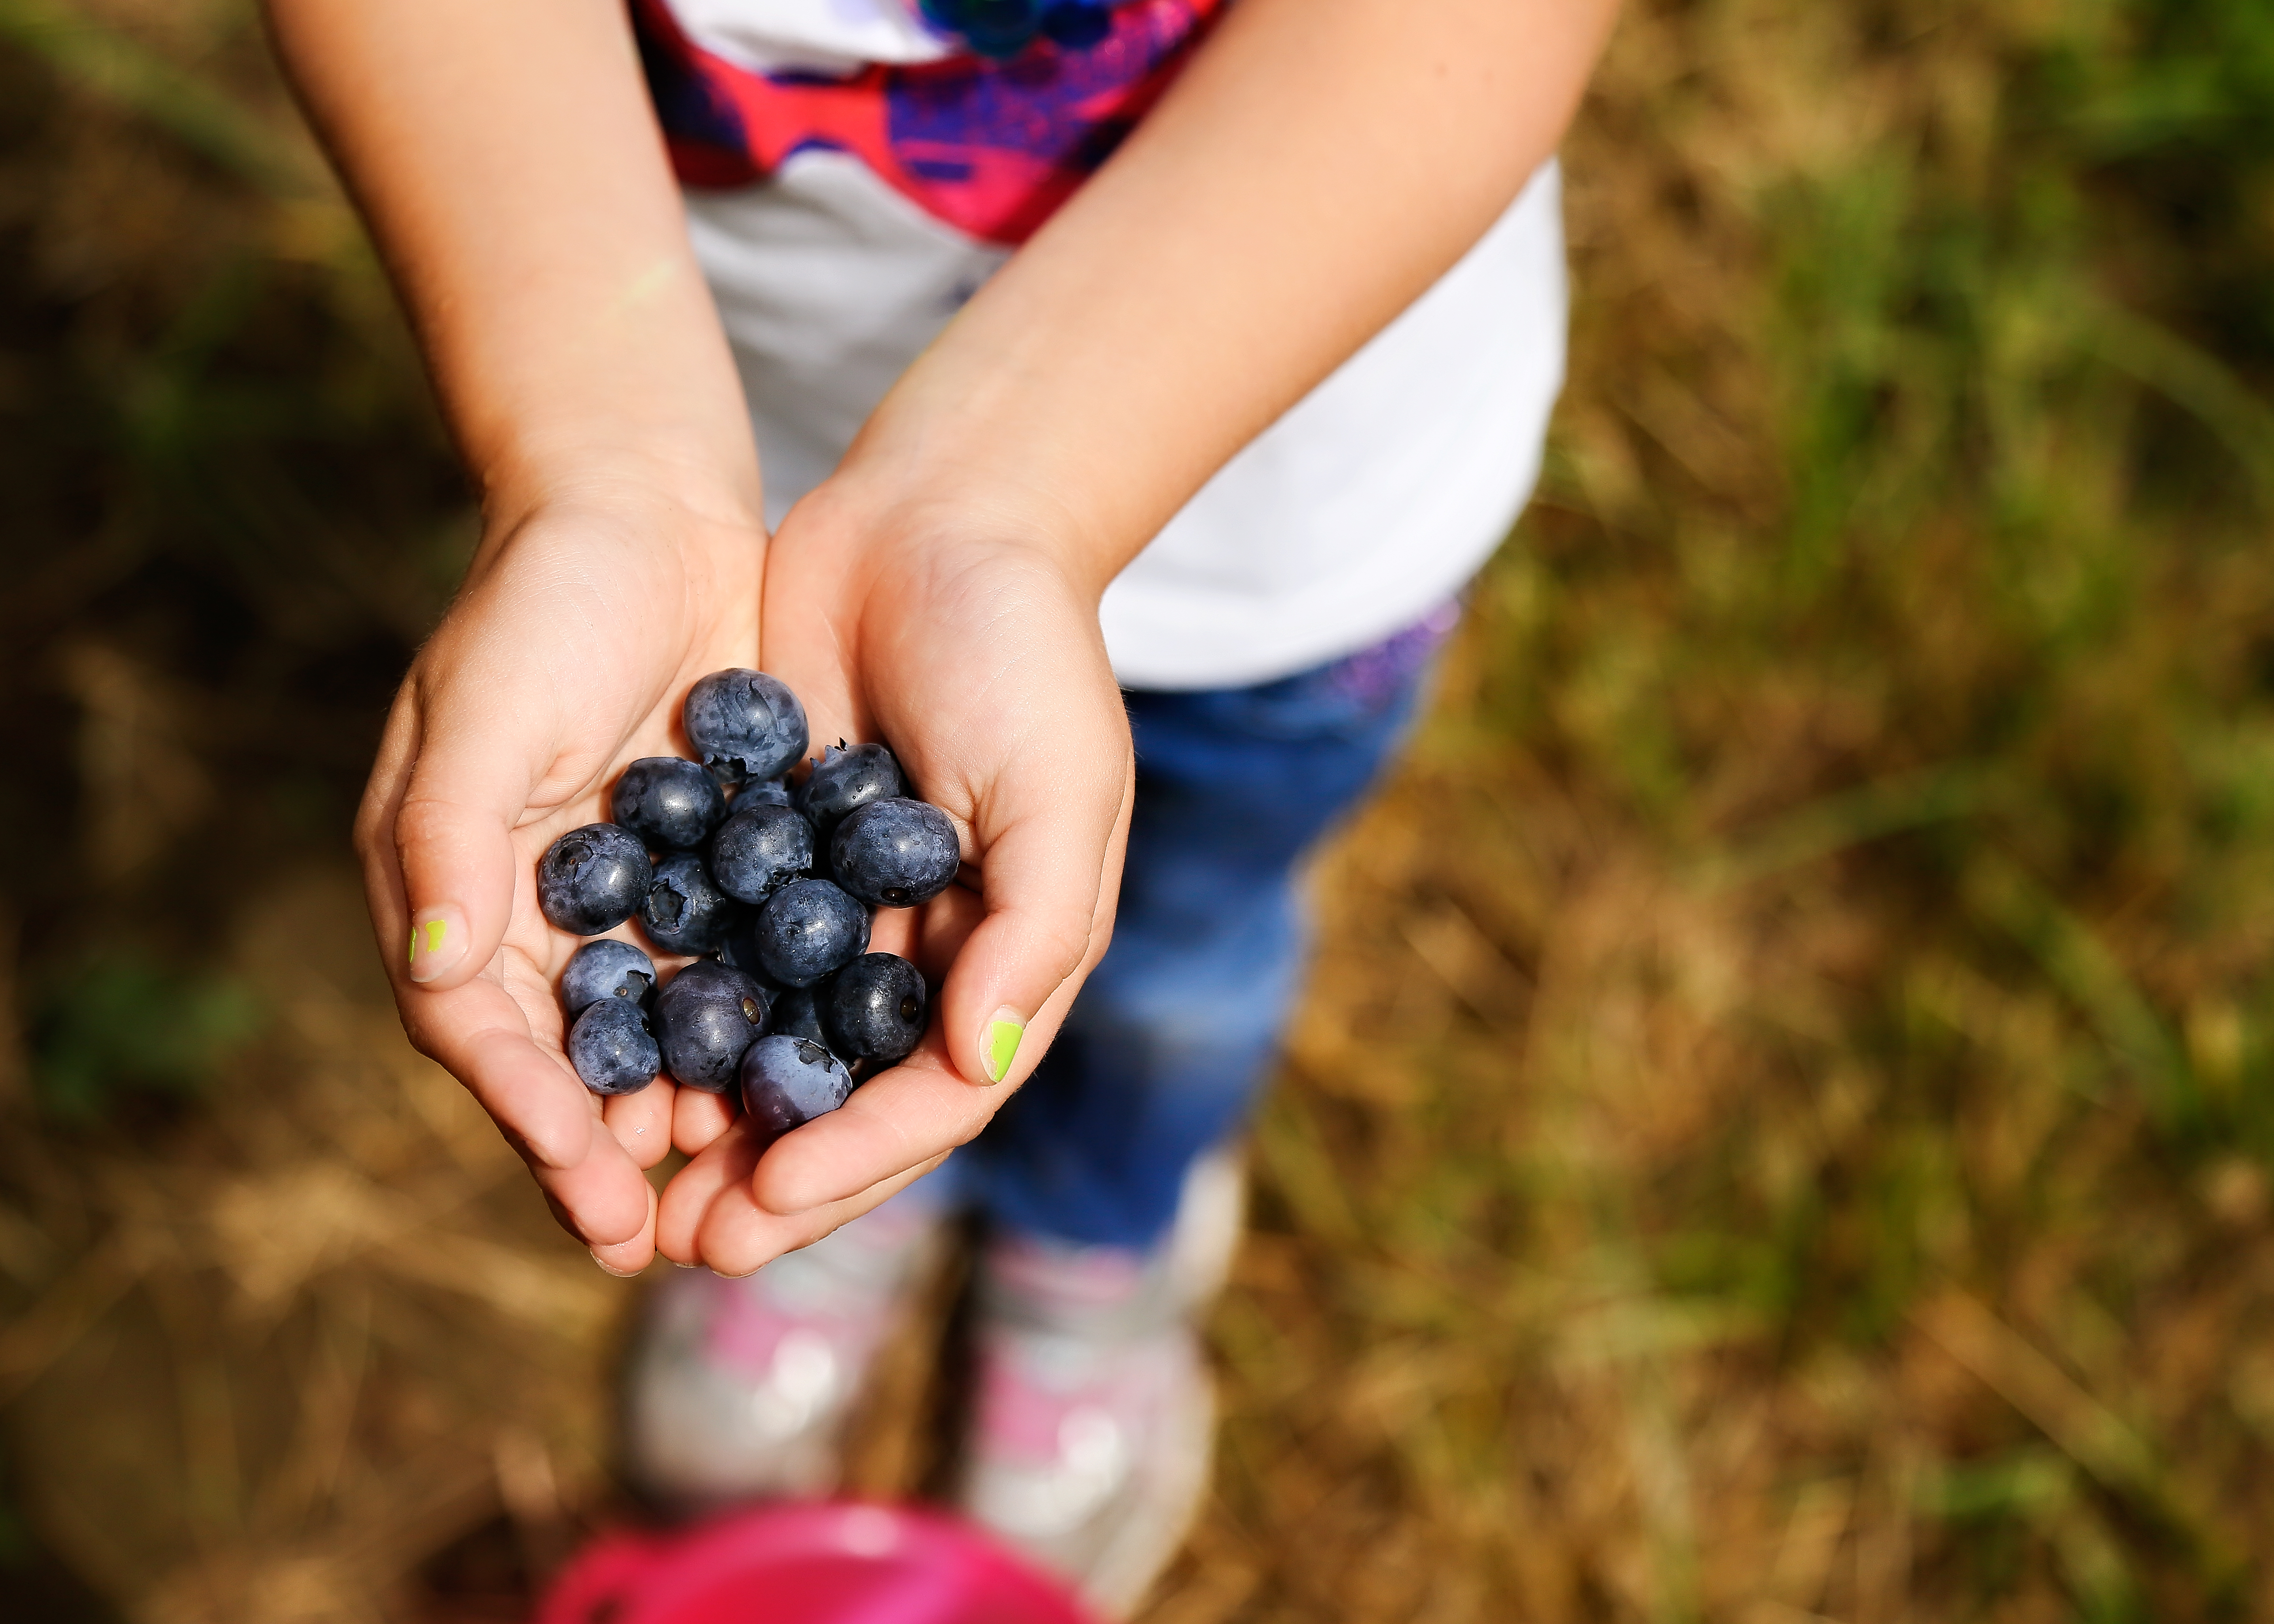 Child with blurberries